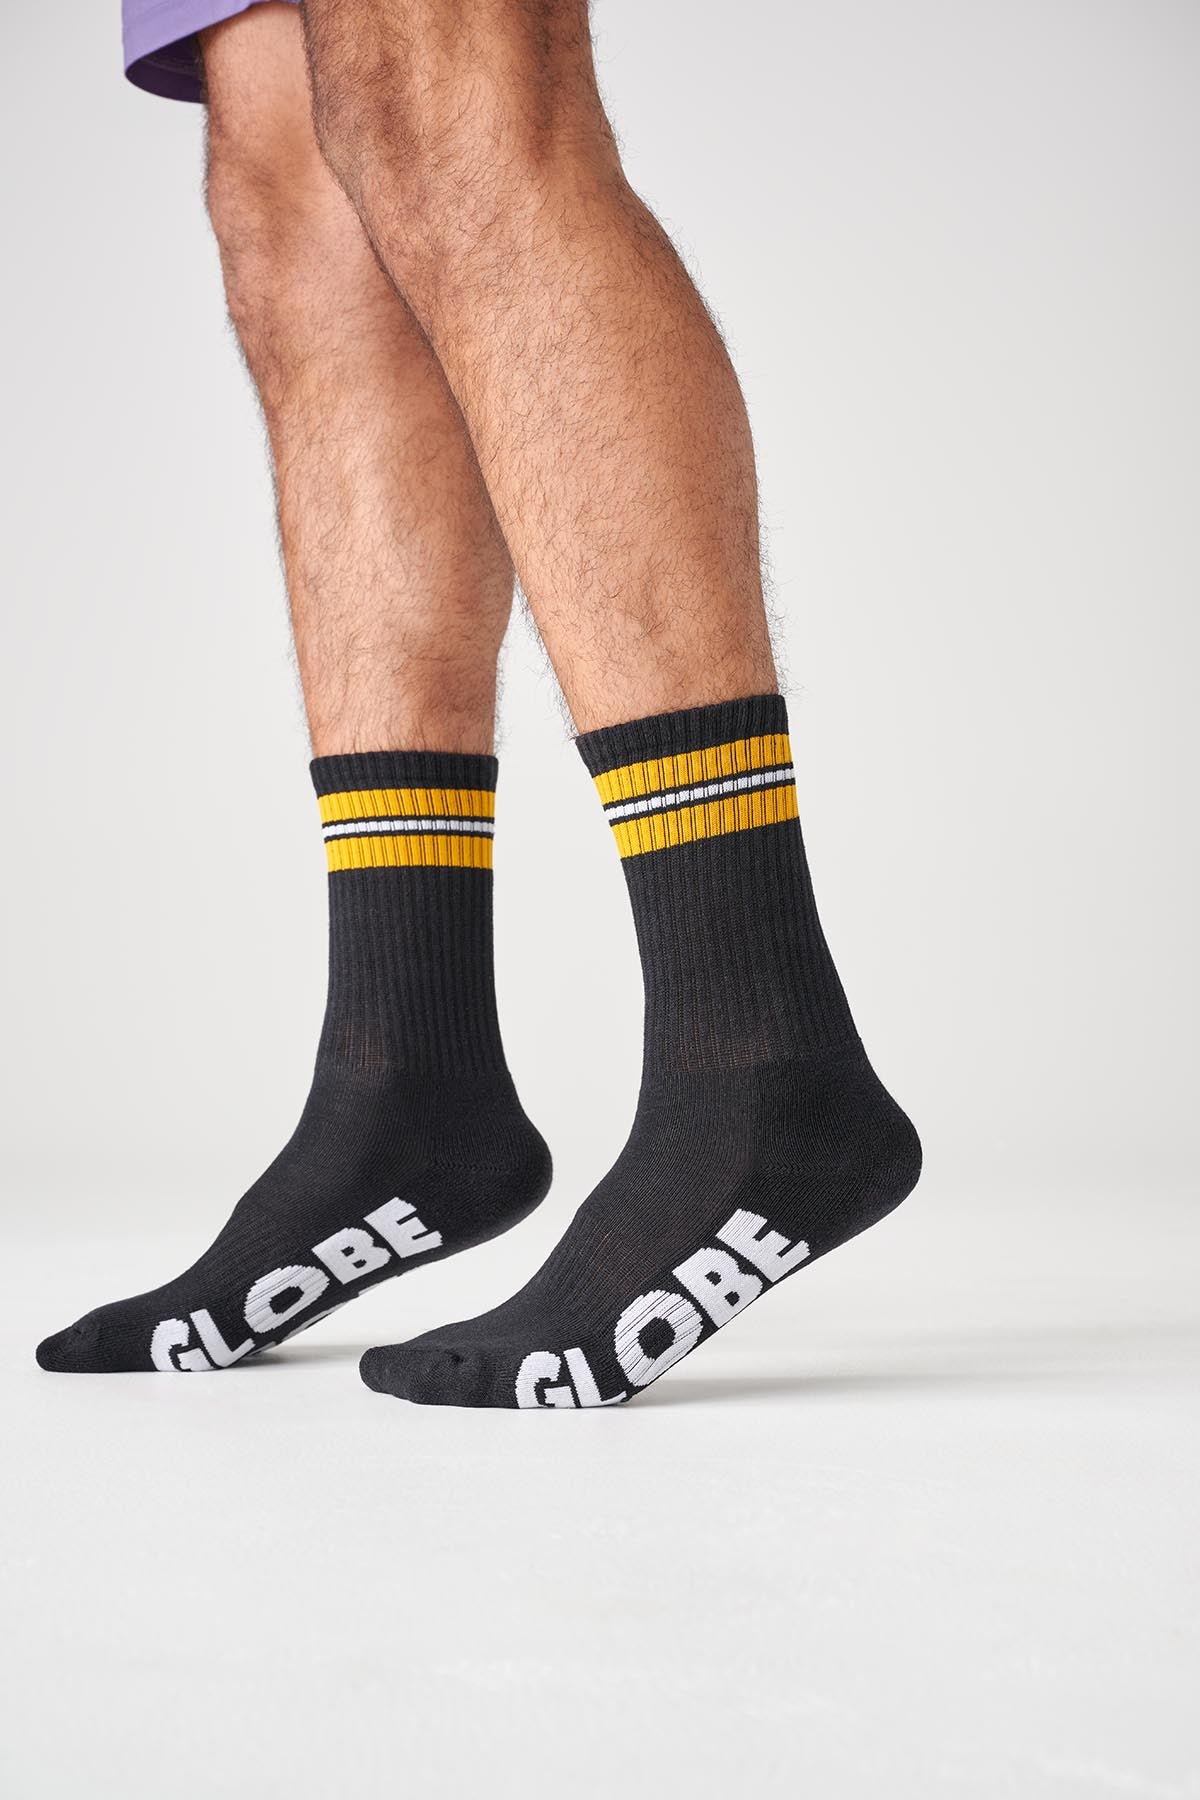 Off Course Crew Sock 3 Pack - Assorted